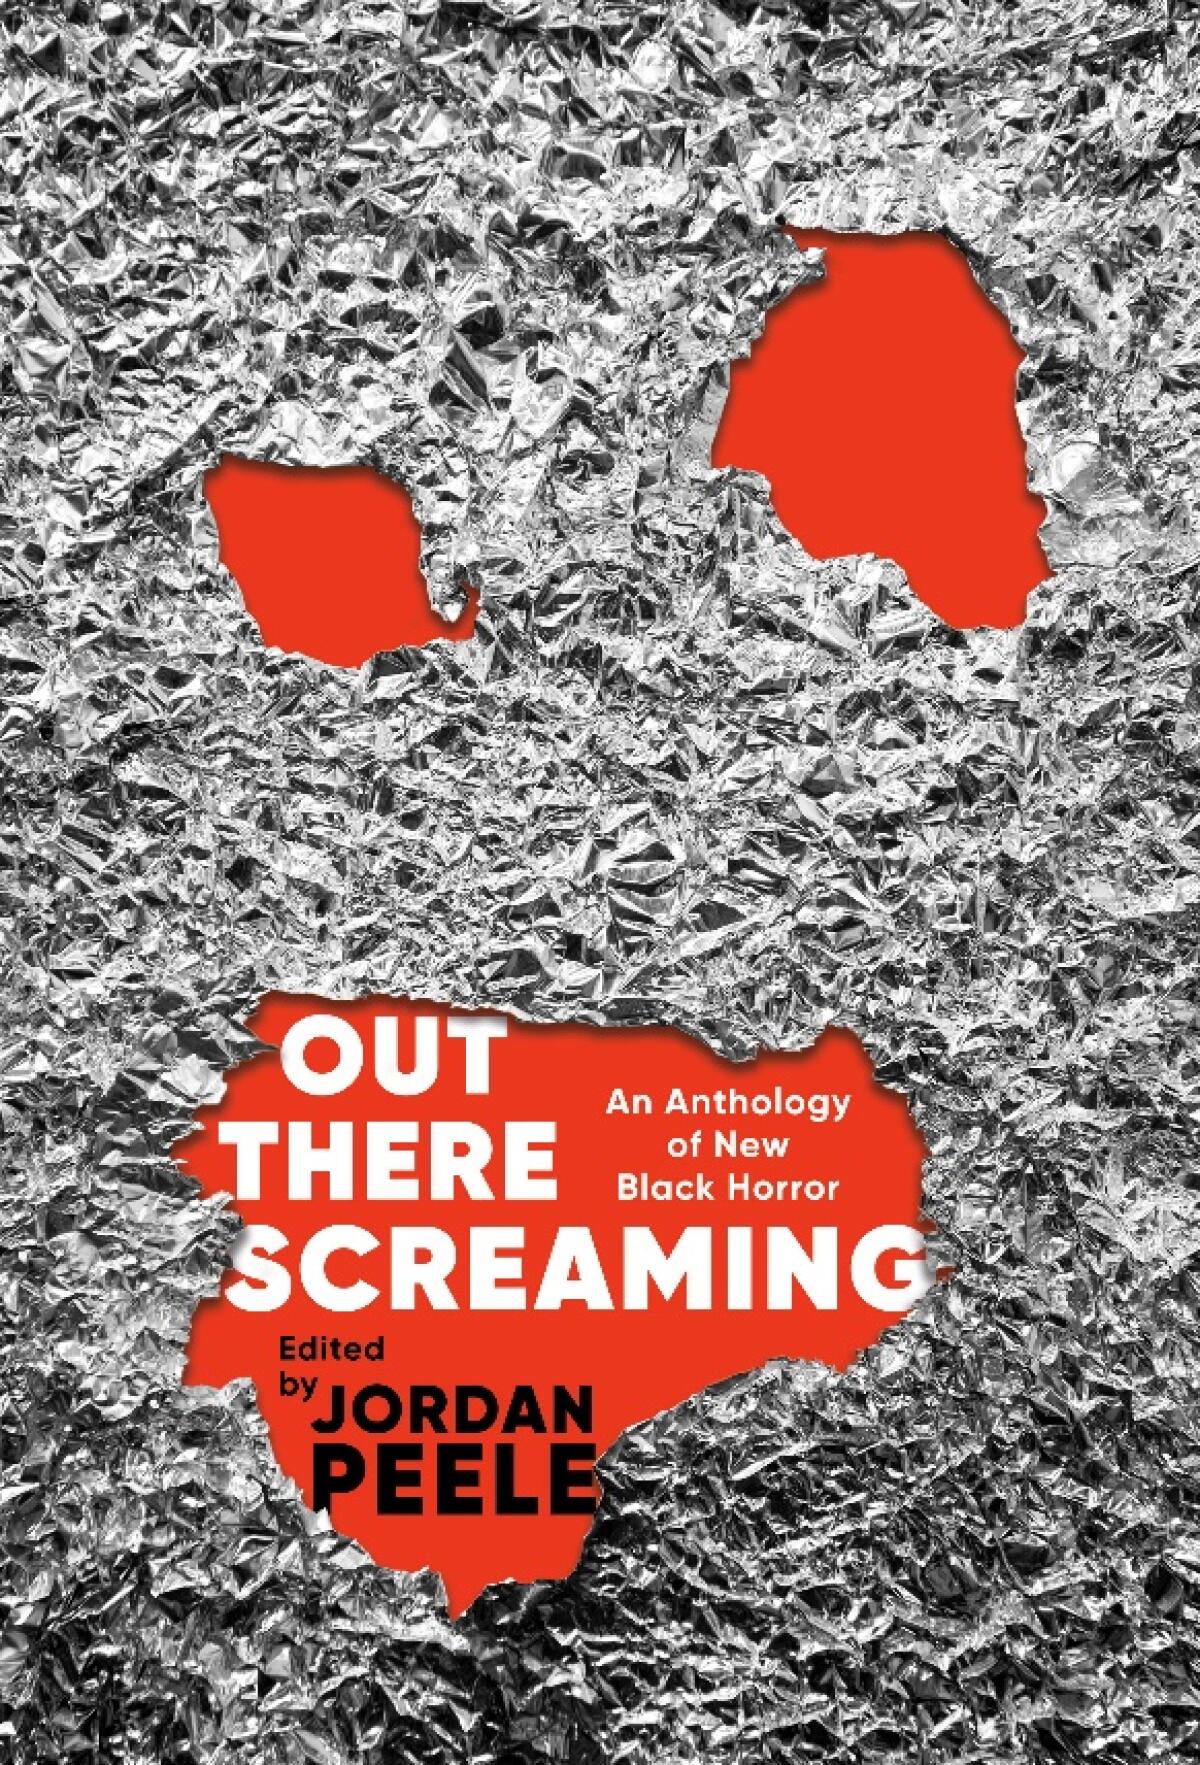 "Out There Screaming," edited by Jordan Peele